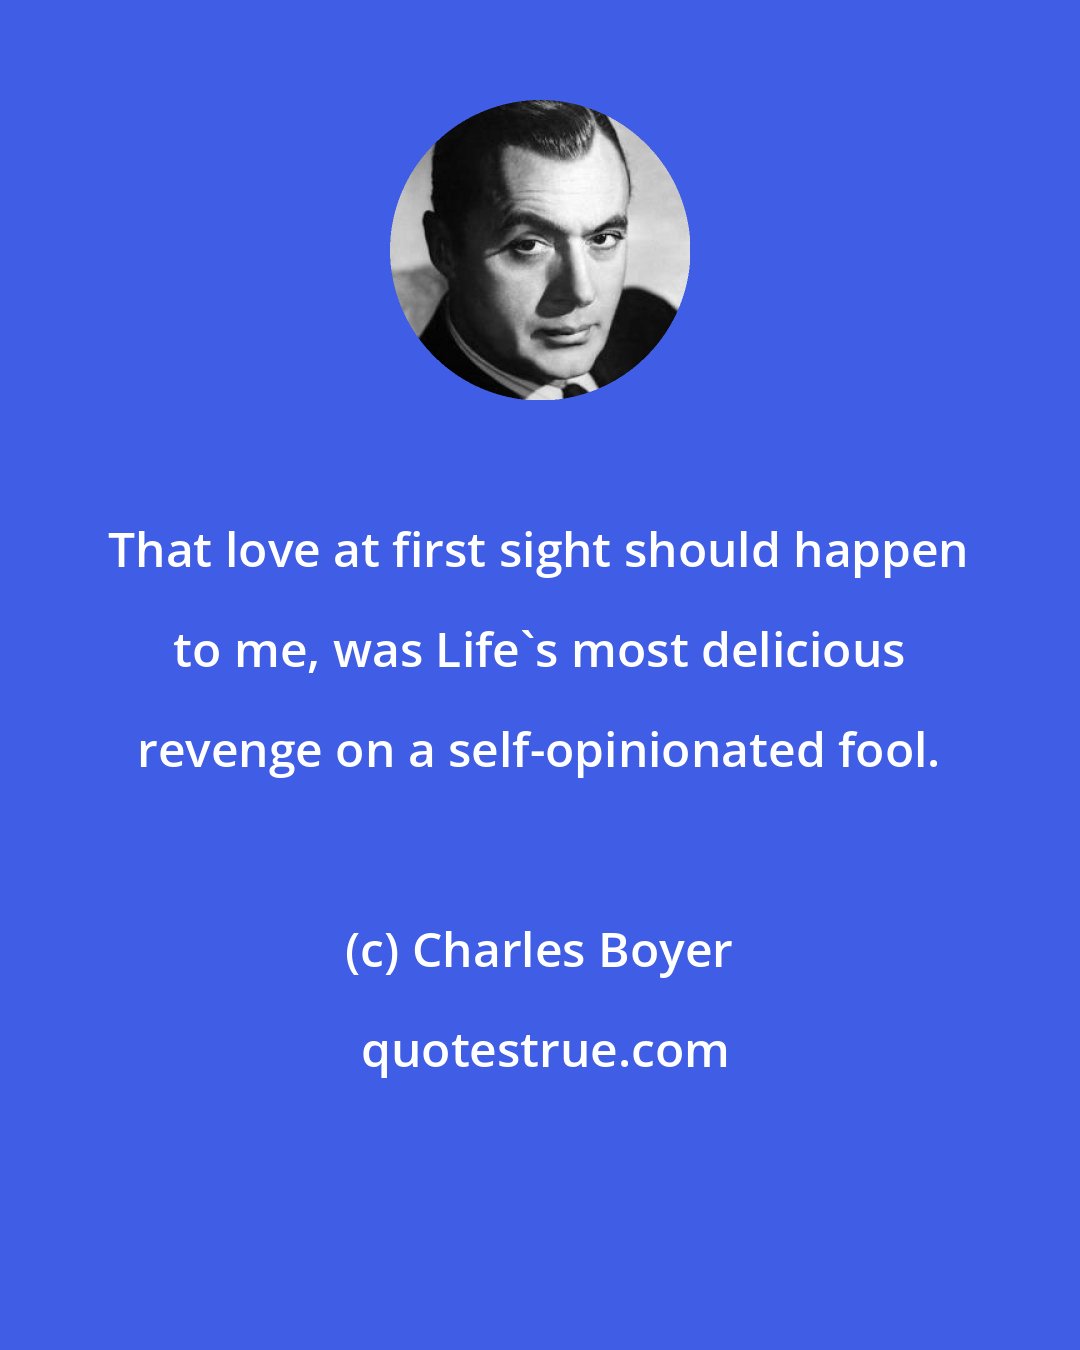 Charles Boyer: That love at first sight should happen to me, was Life's most delicious revenge on a self-opinionated fool.